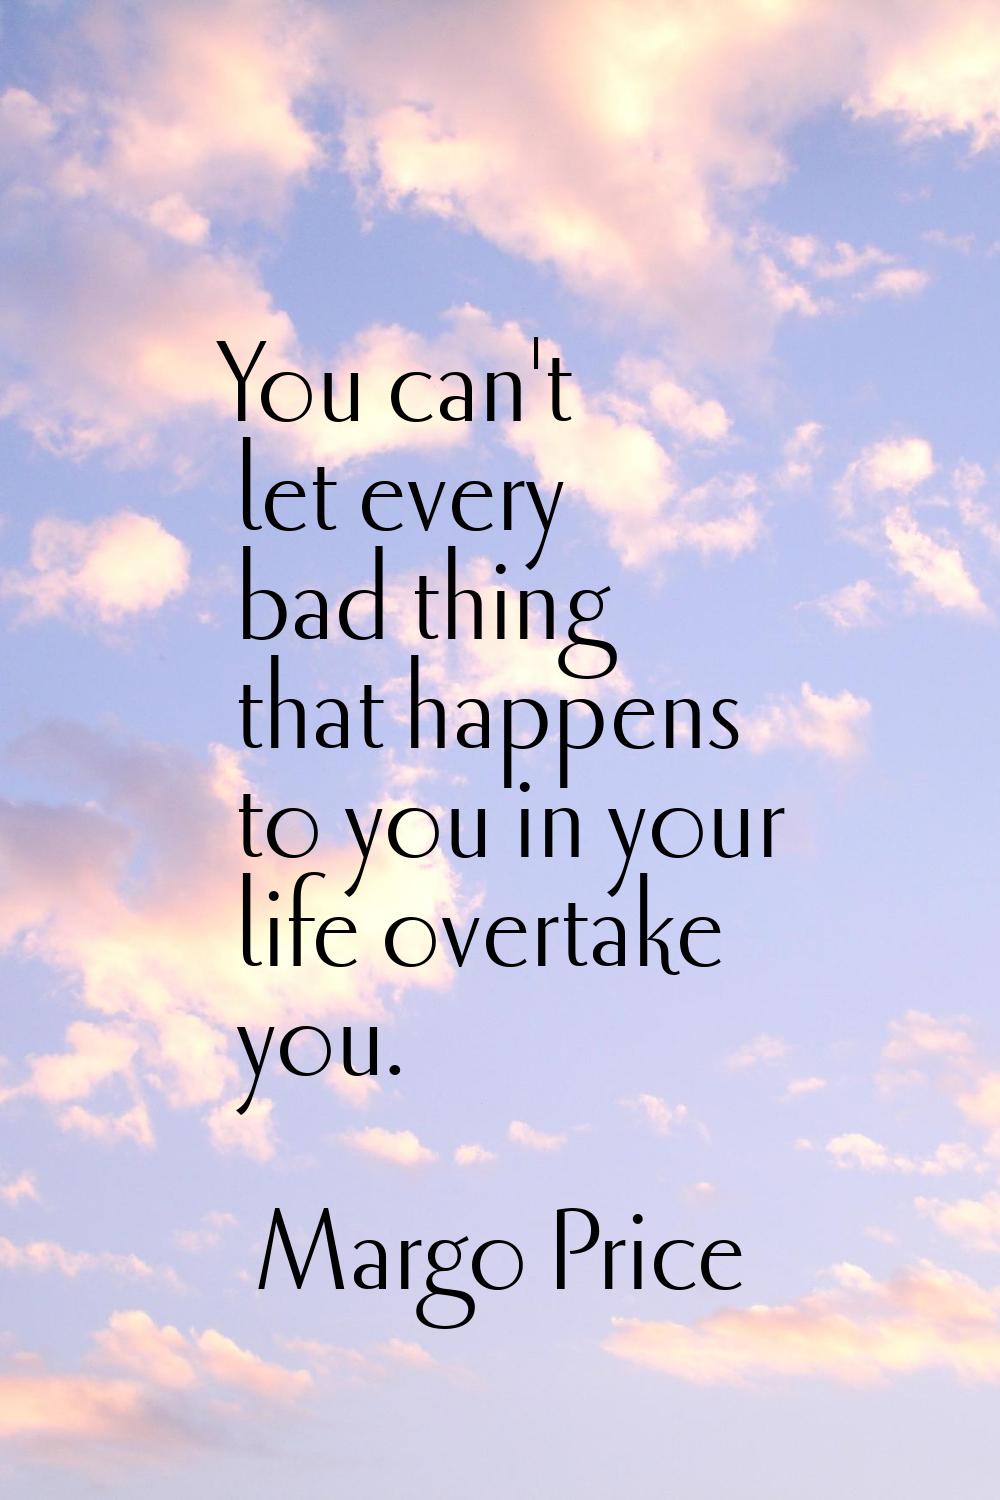 You can't let every bad thing that happens to you in your life overtake you.